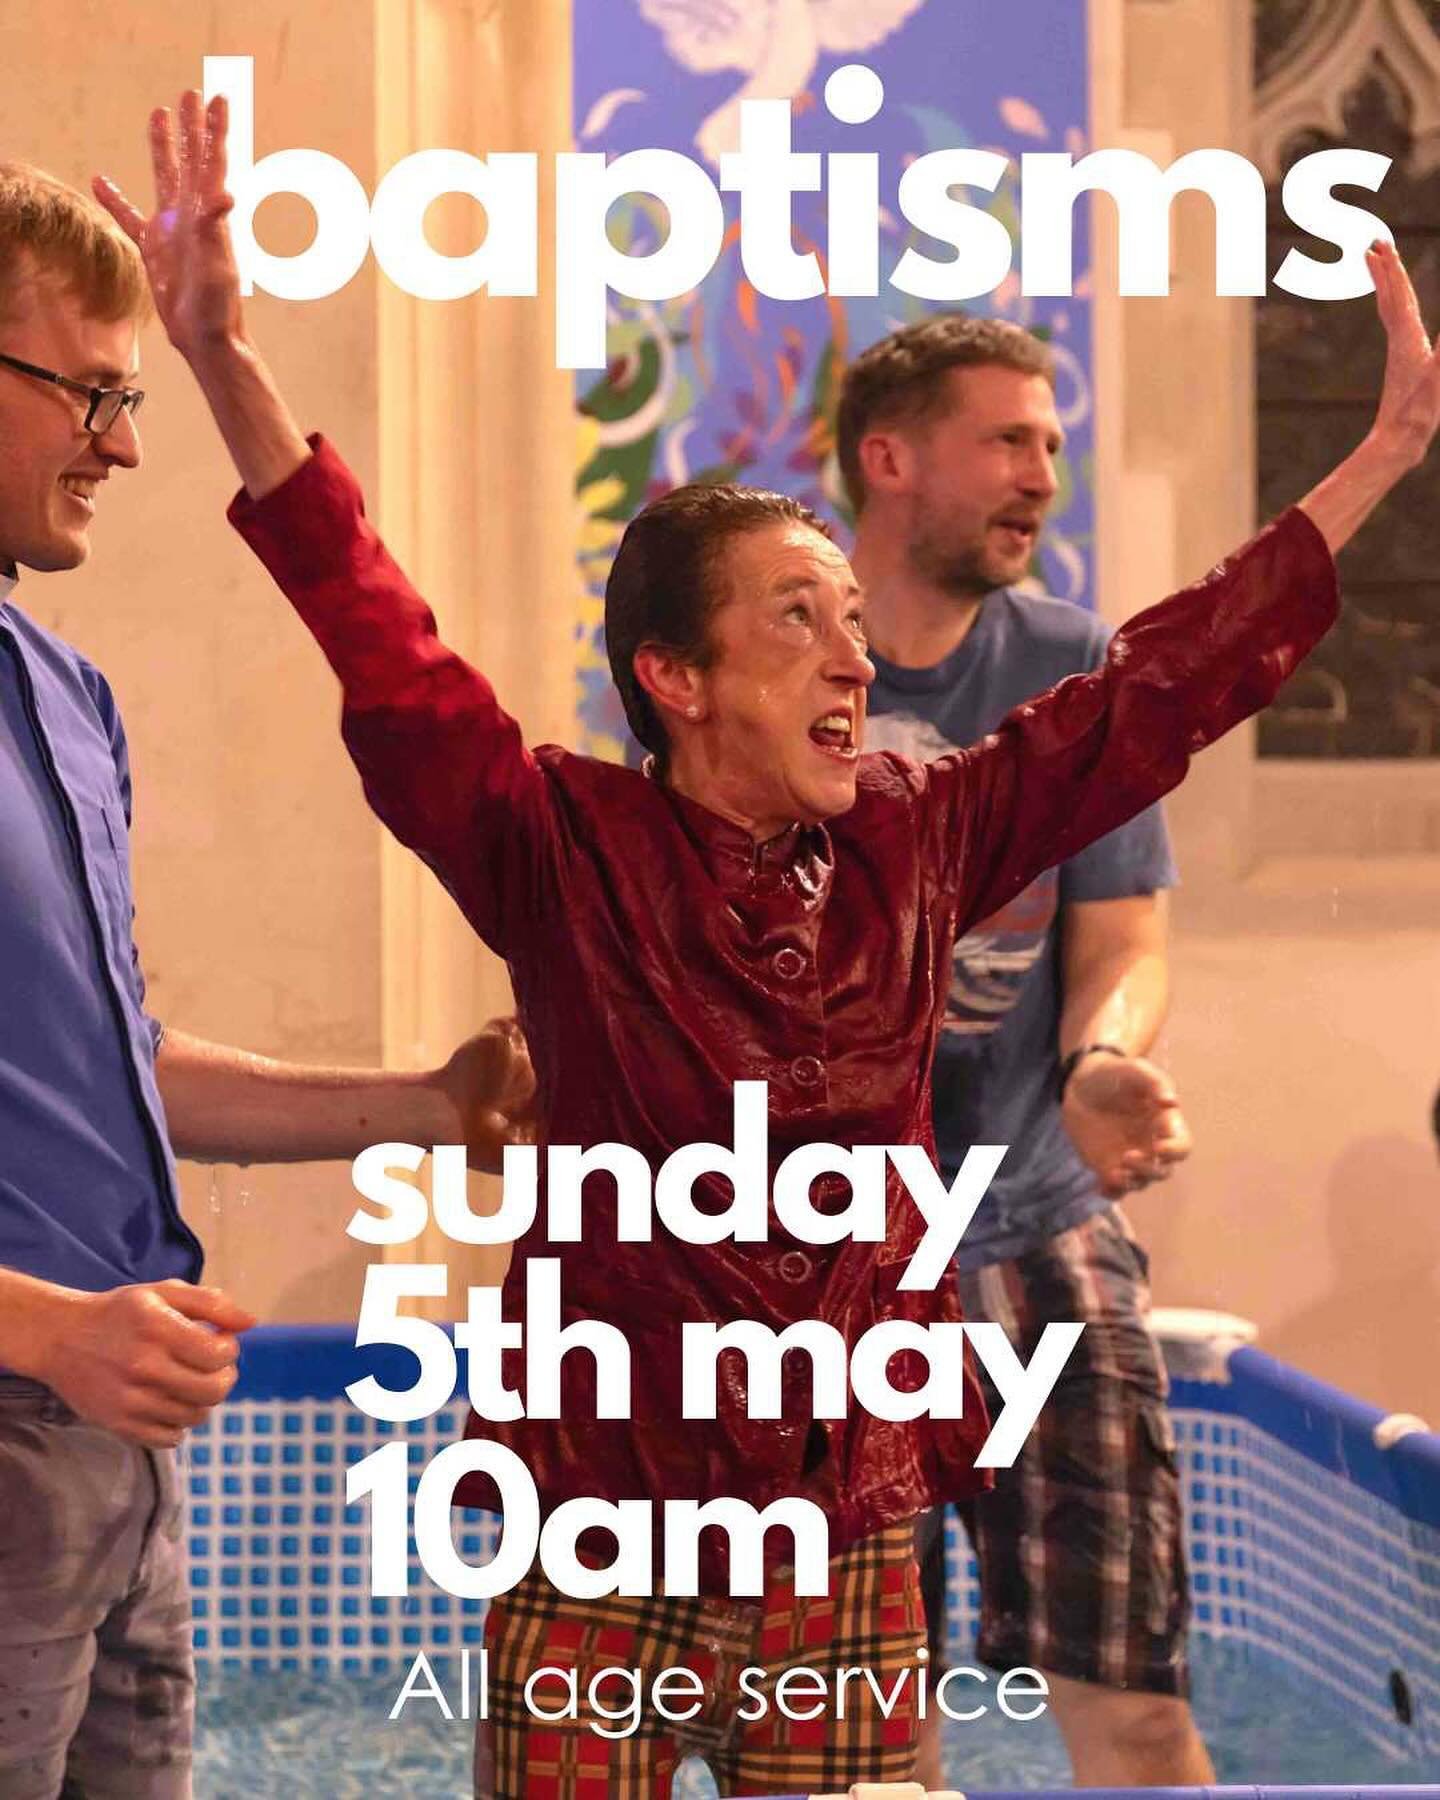 Not long until Sunday - the BEST day of the week! 🙌🥳
Tomorrow we will be gathering at 10am for a special all age baptism service. You don't want to miss this! 

Then at 6.30pm it's Kingdom Come, our monthly worship and prayer evening. Everyone's we